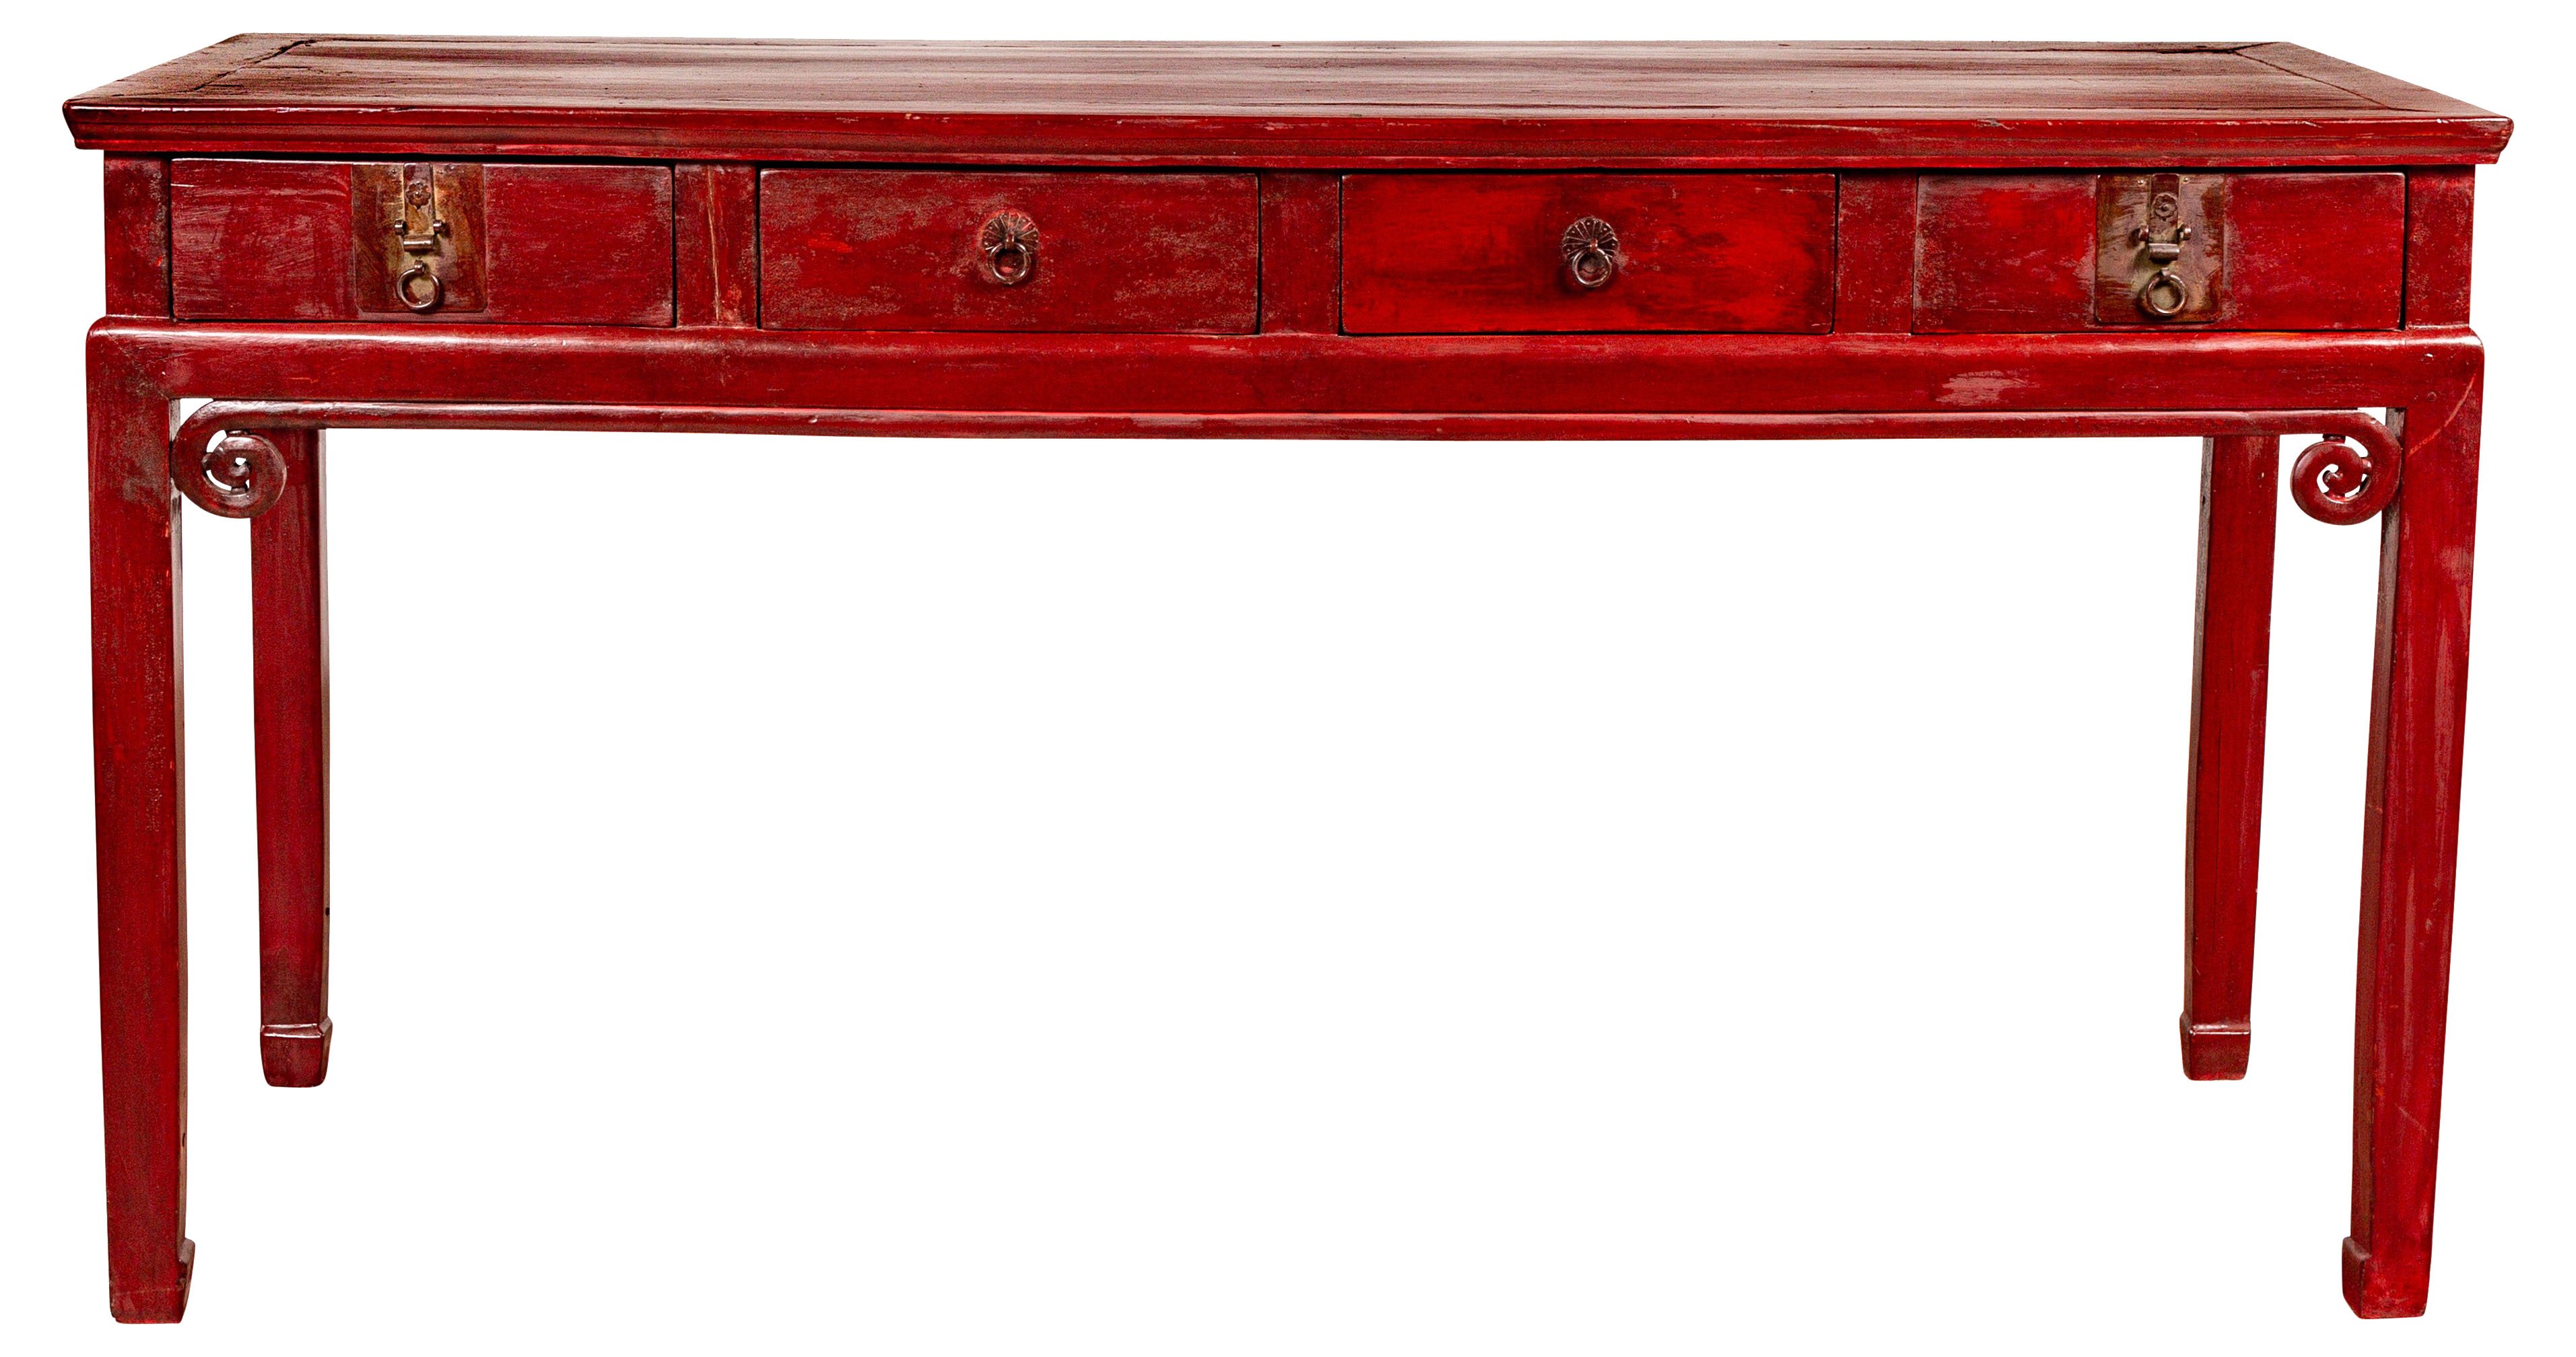 Chinese Antique Red Lacquered Wood Desk~P77555076